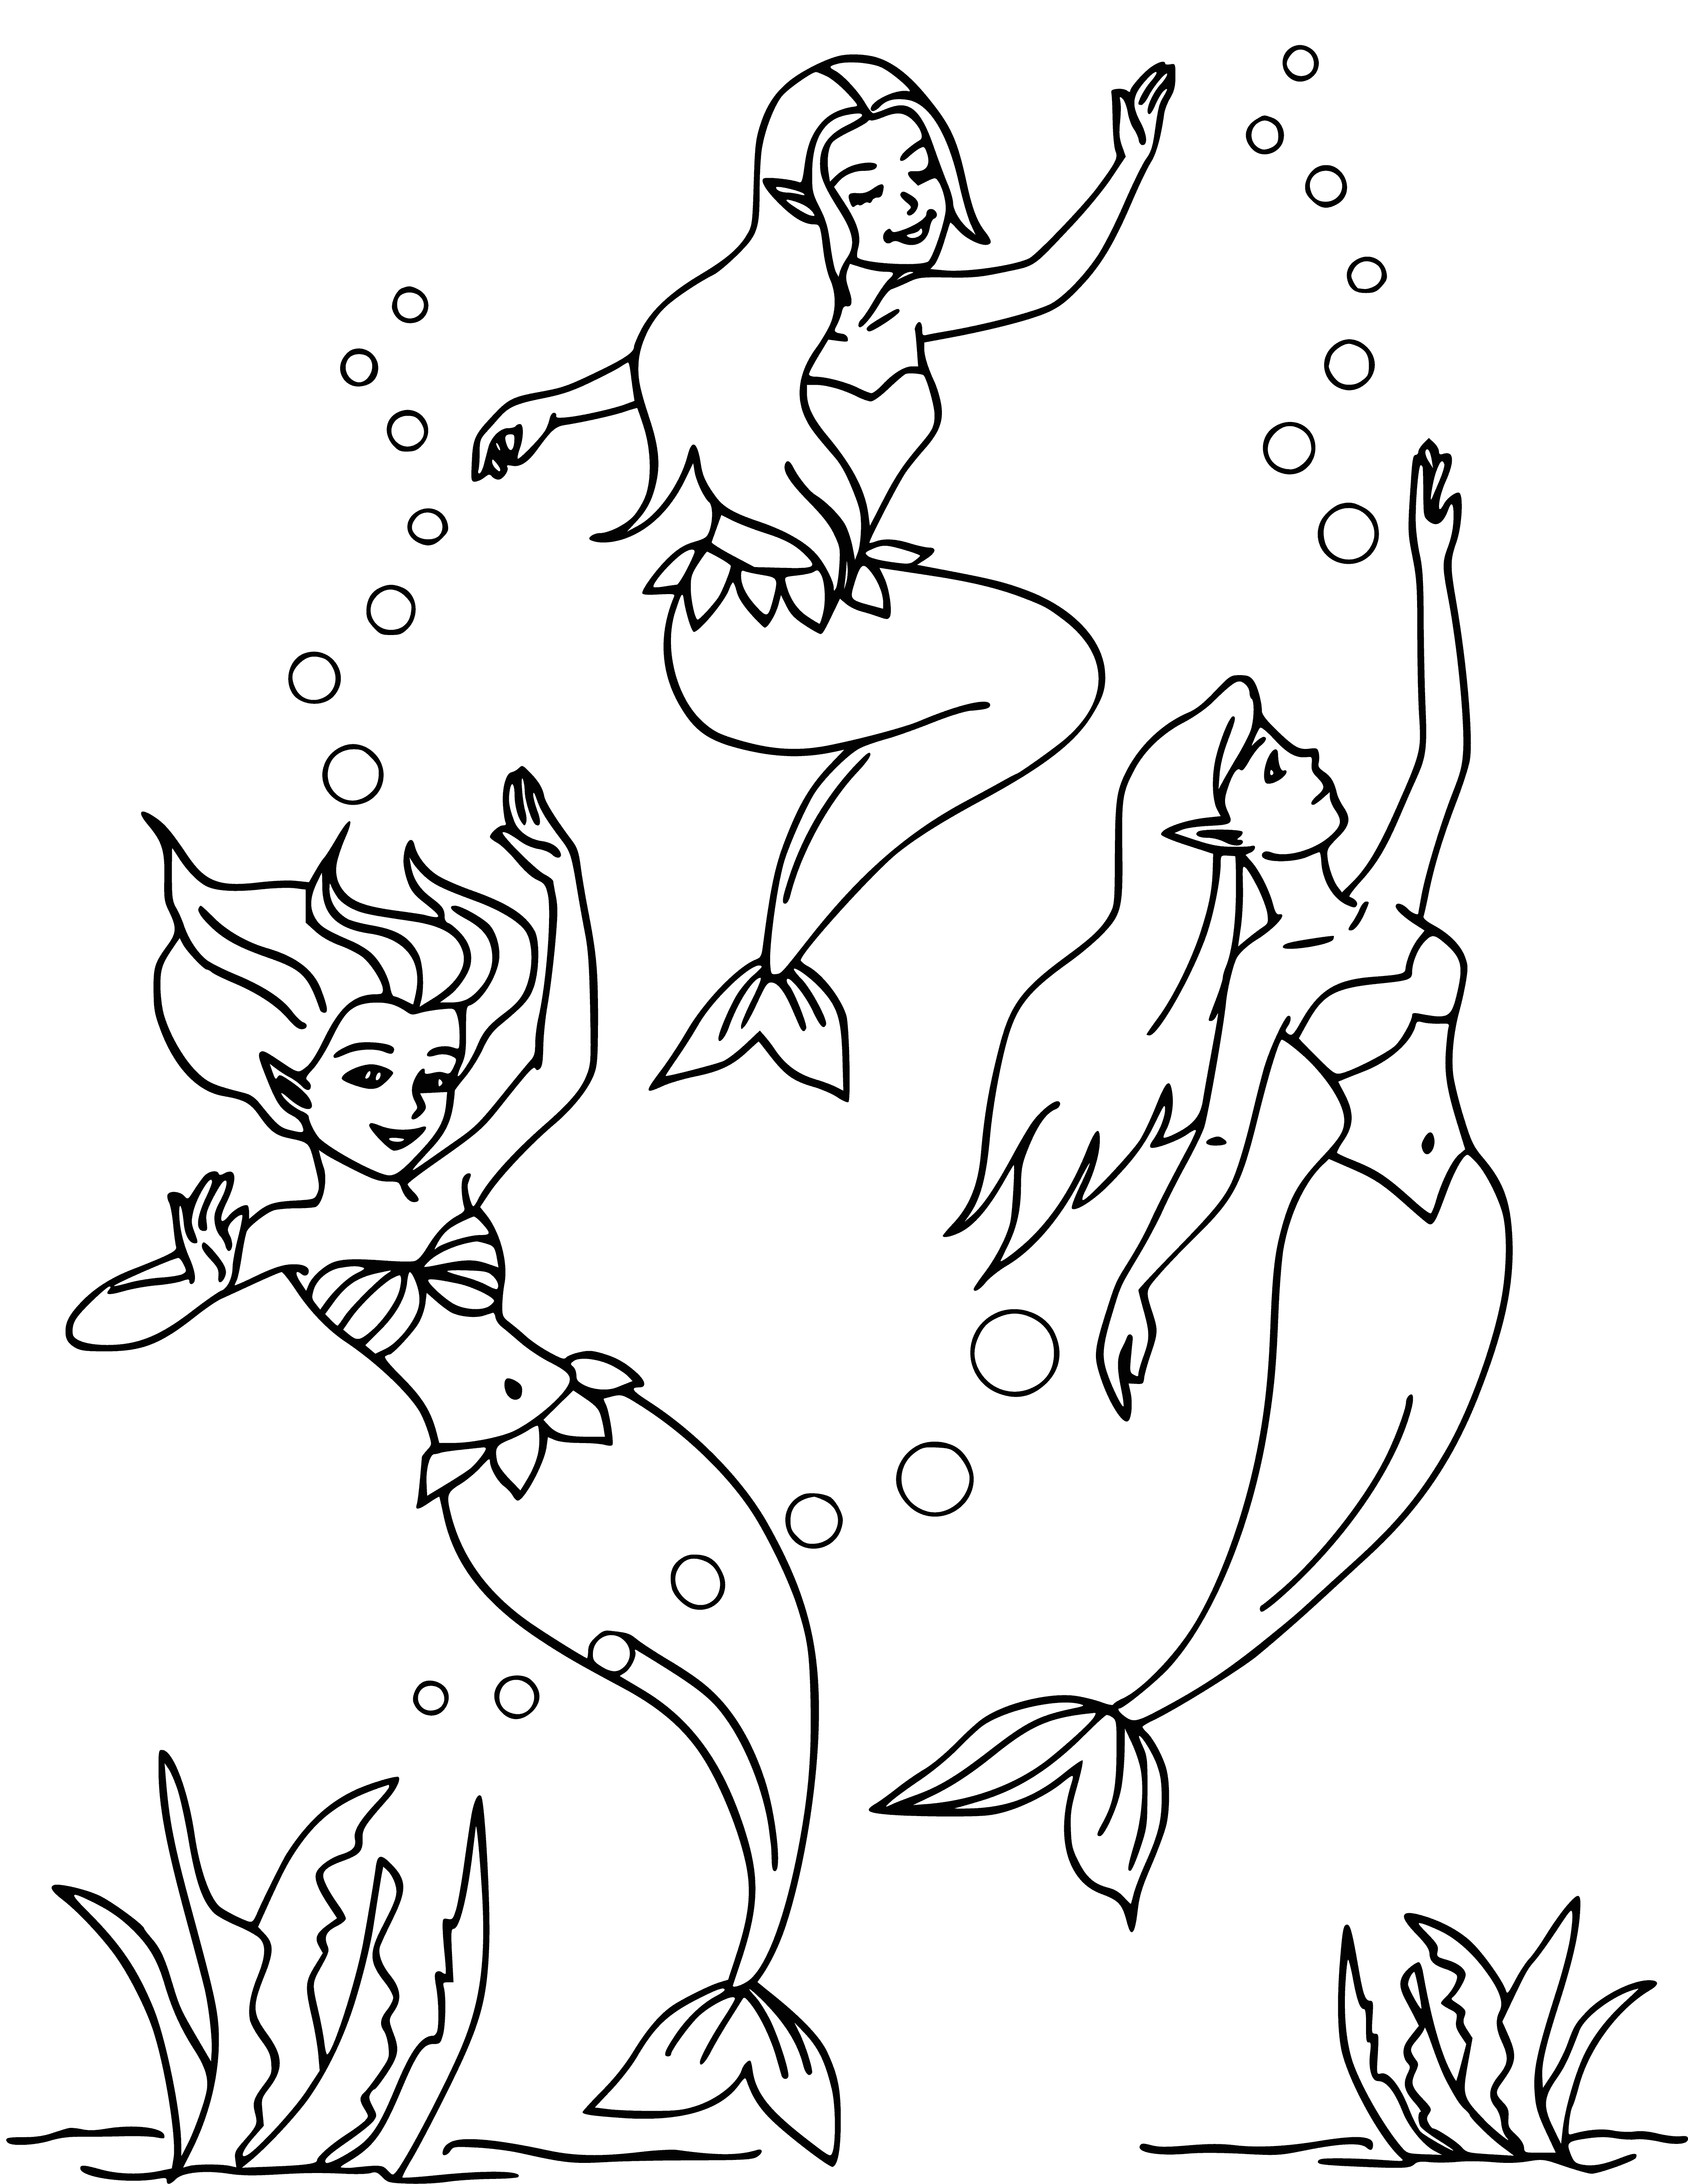 coloring page: Three beautiful sirens sing, lure sailors to a watery death. Beware the song of the sea!